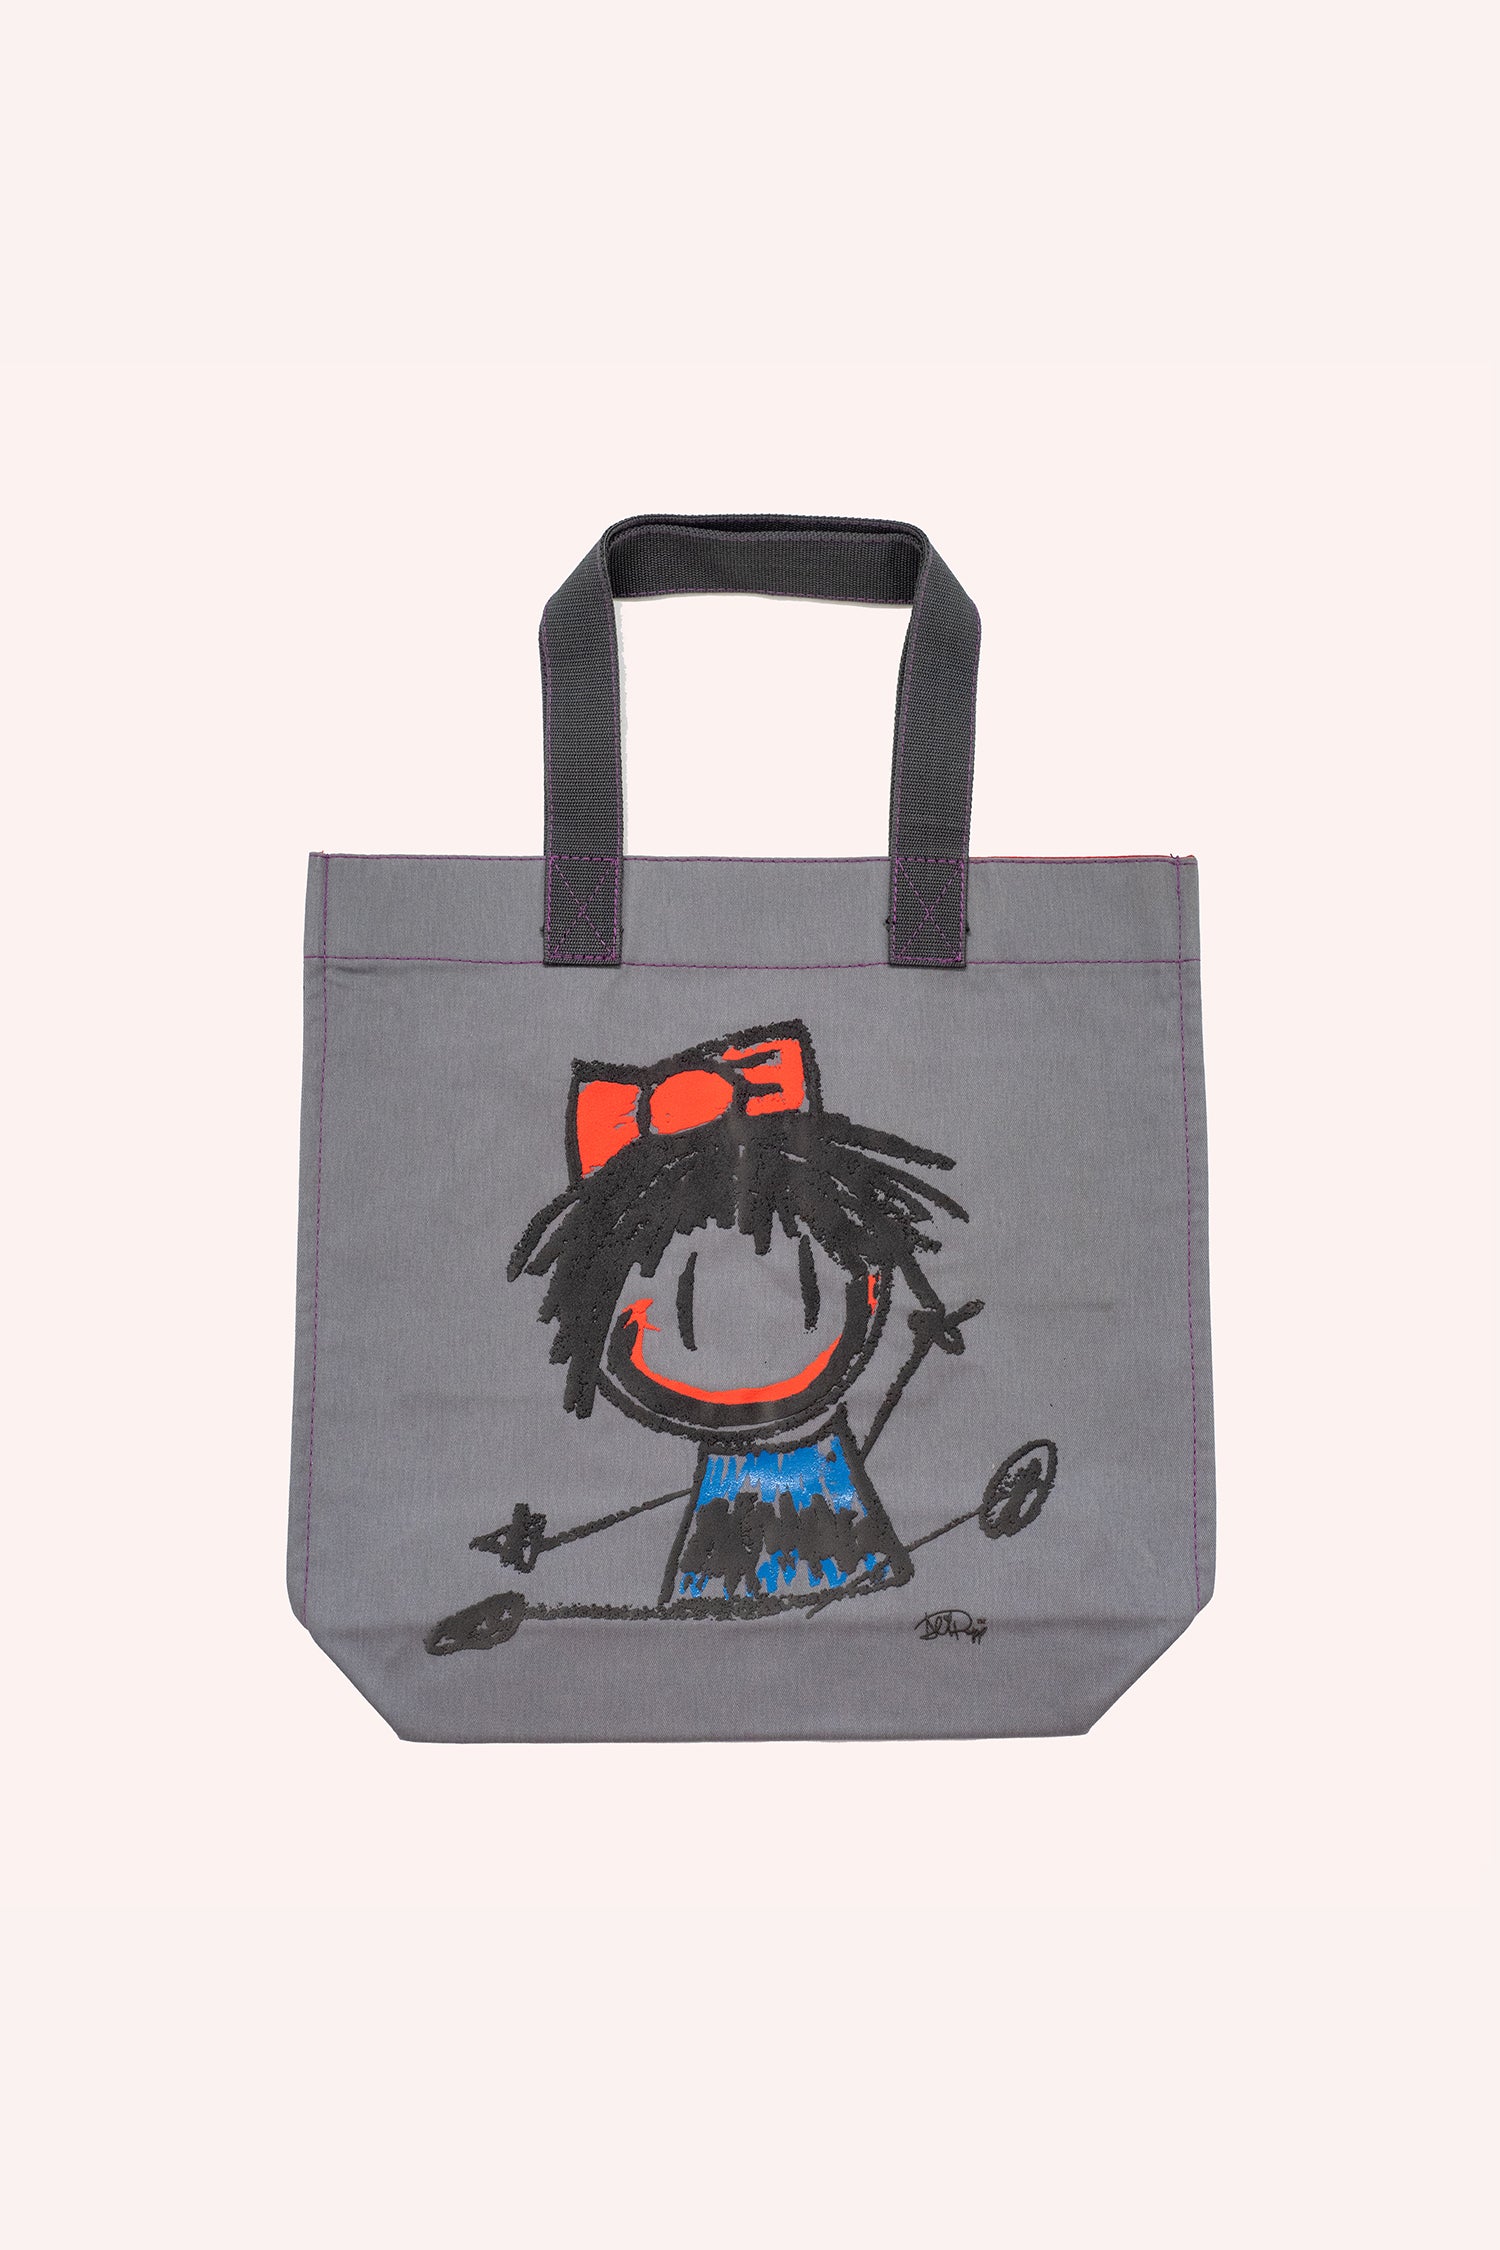 Tote bag, square grey, handles, red stiches lines, Ali Rapp artwork Happy girl with a red ribbon